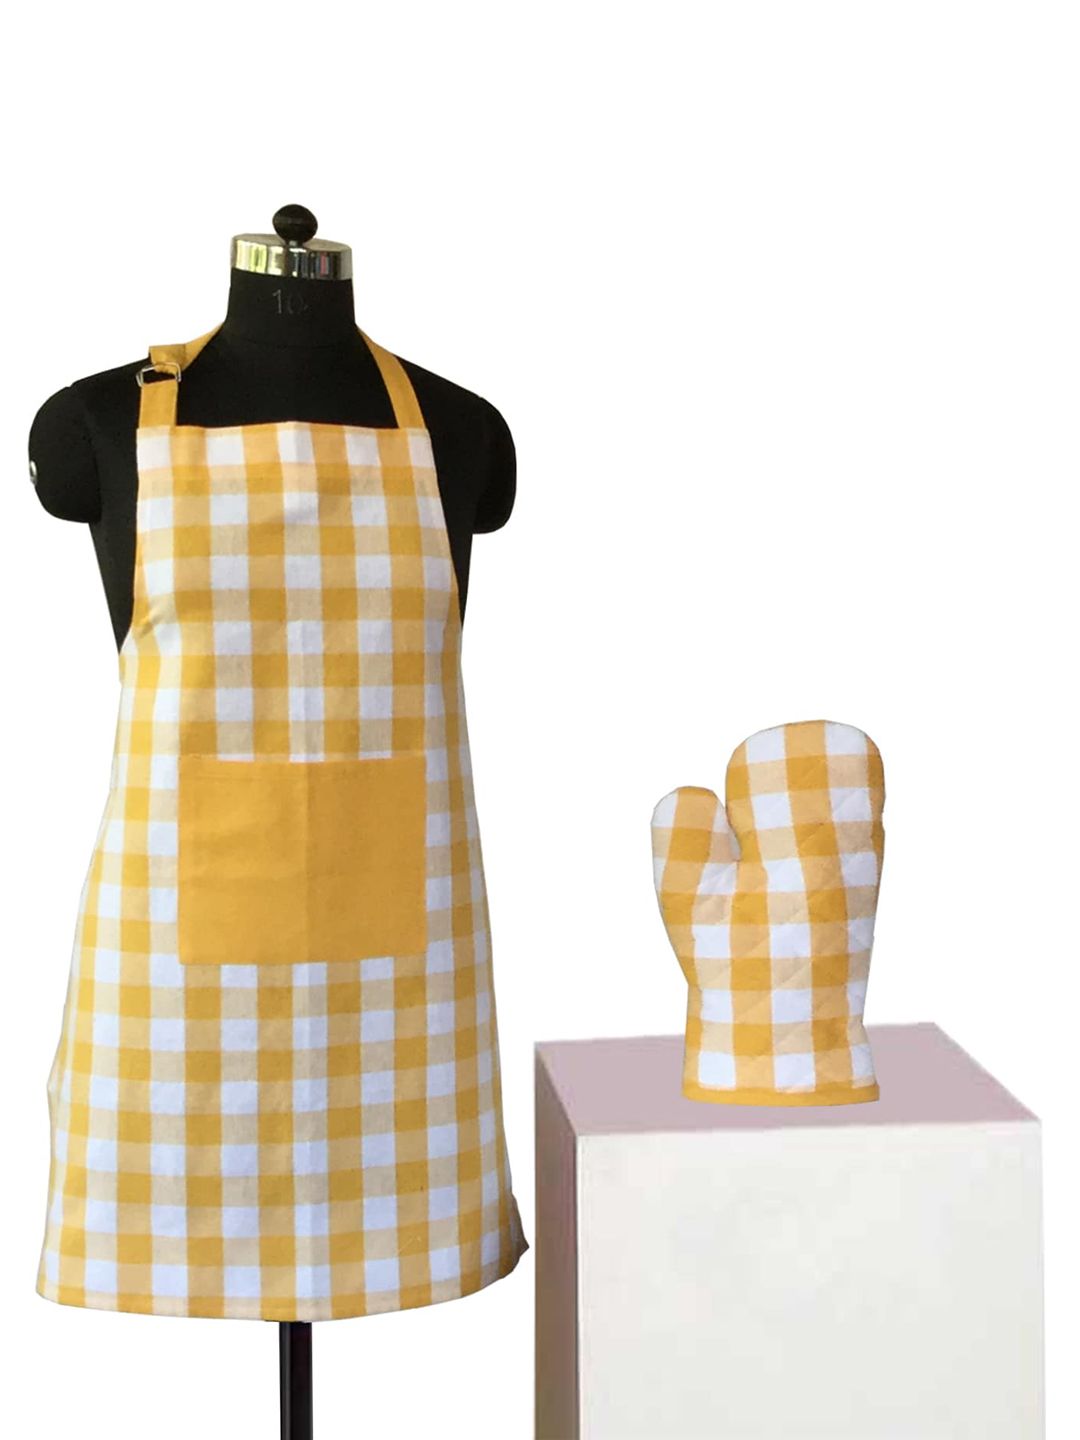 Lushomes Yellow & White Checked Printed Aprons With Oven Gloves Price in India